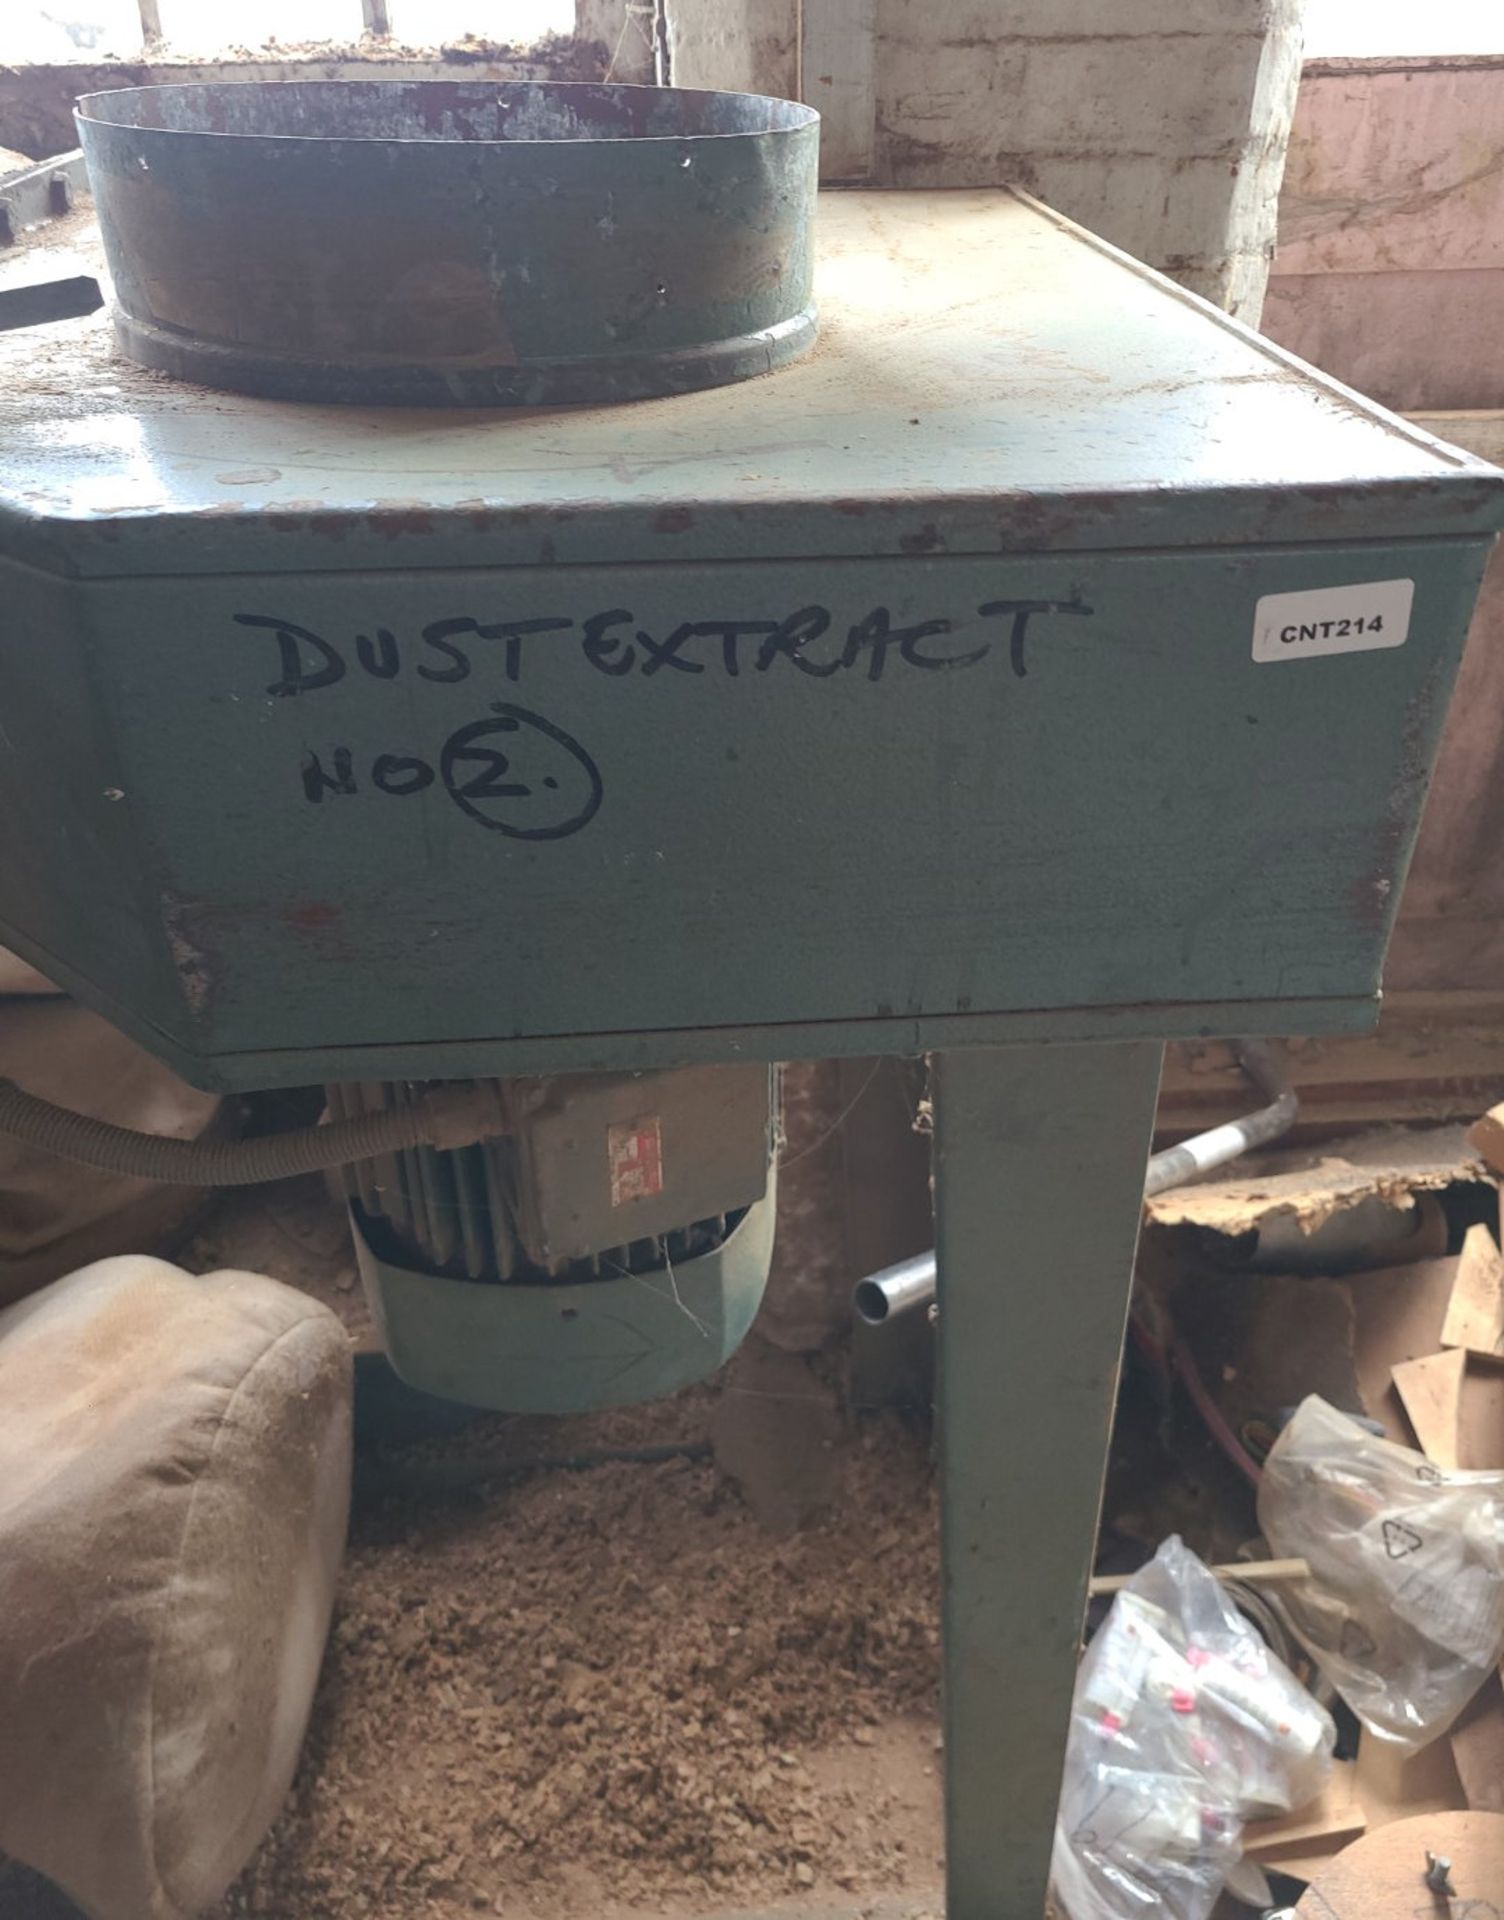 1 x 4-Bag Dust And Wood Waste Extractor/Collector - 3 Phase - Ref: CNT214 - CL846 - Location: Oxford - Image 3 of 22